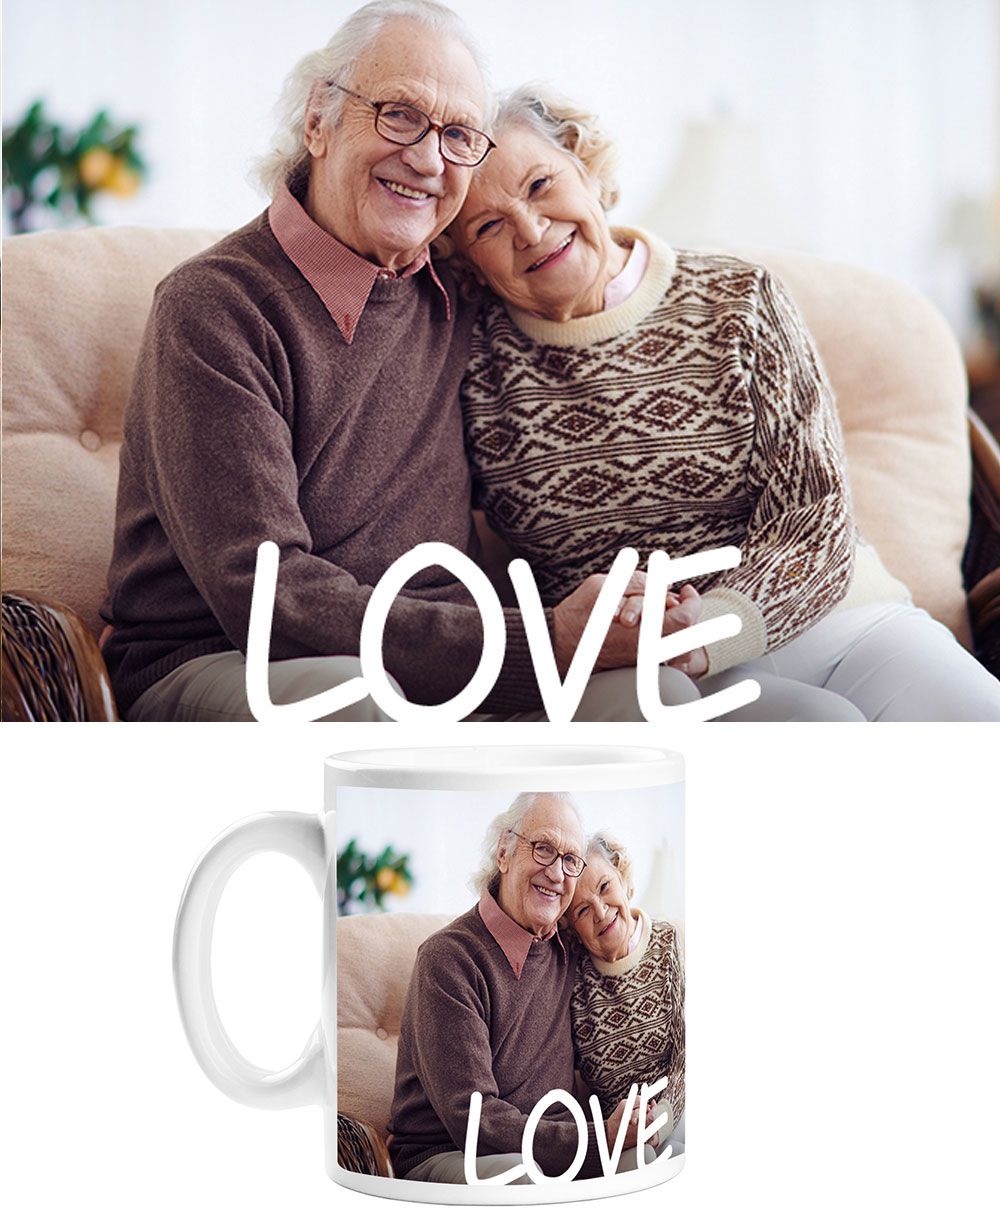 Picture of Custom Love Mug with Personalized Image